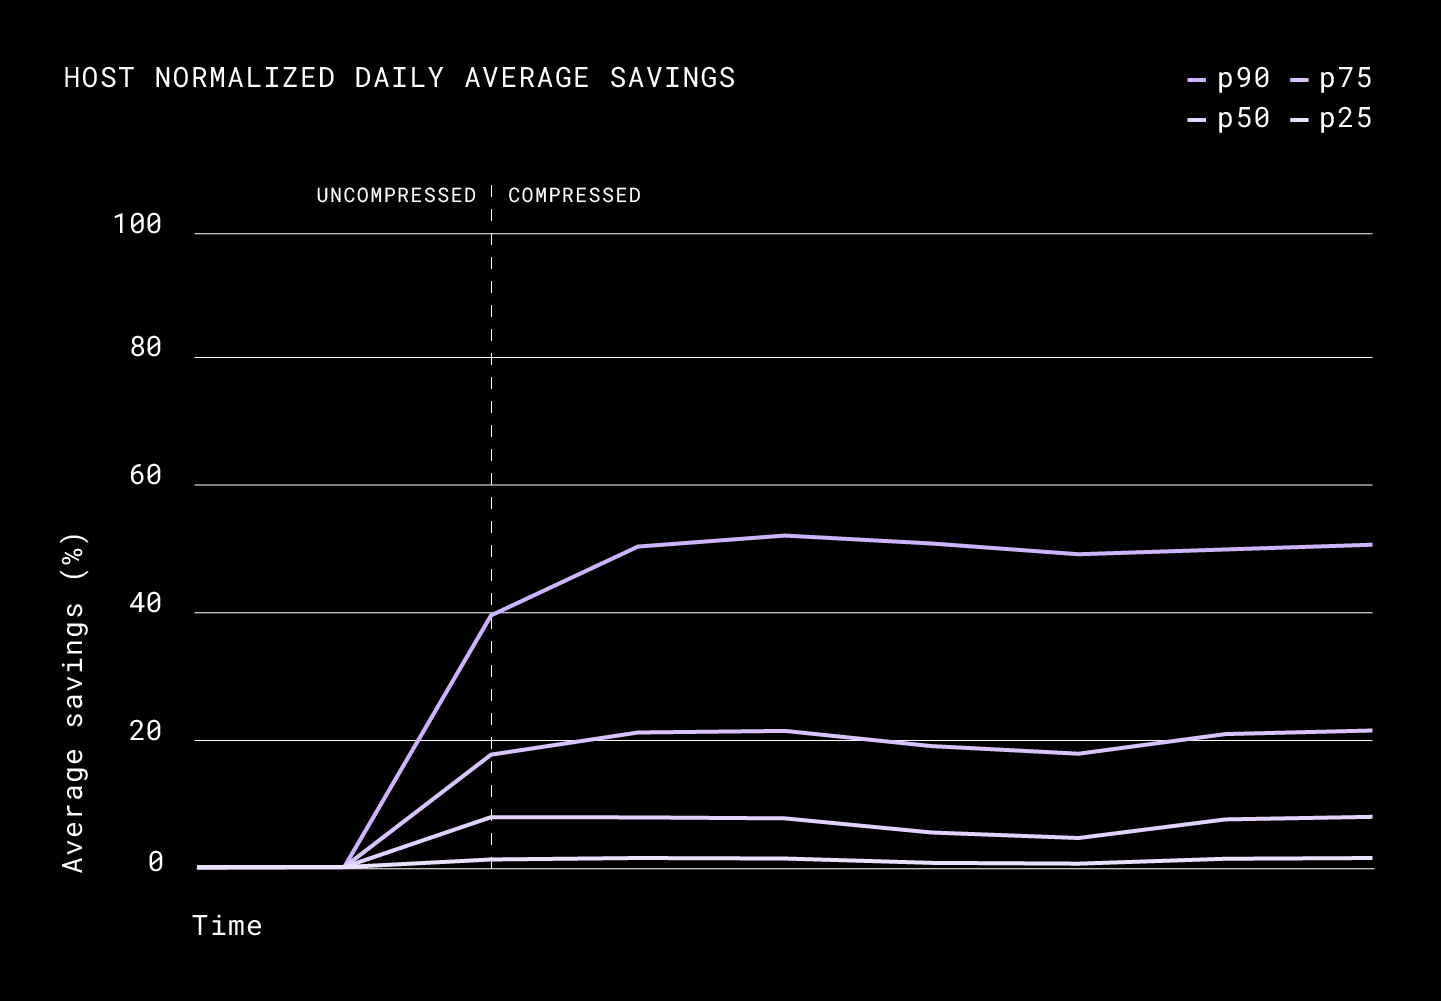 Host normalized daily average savings